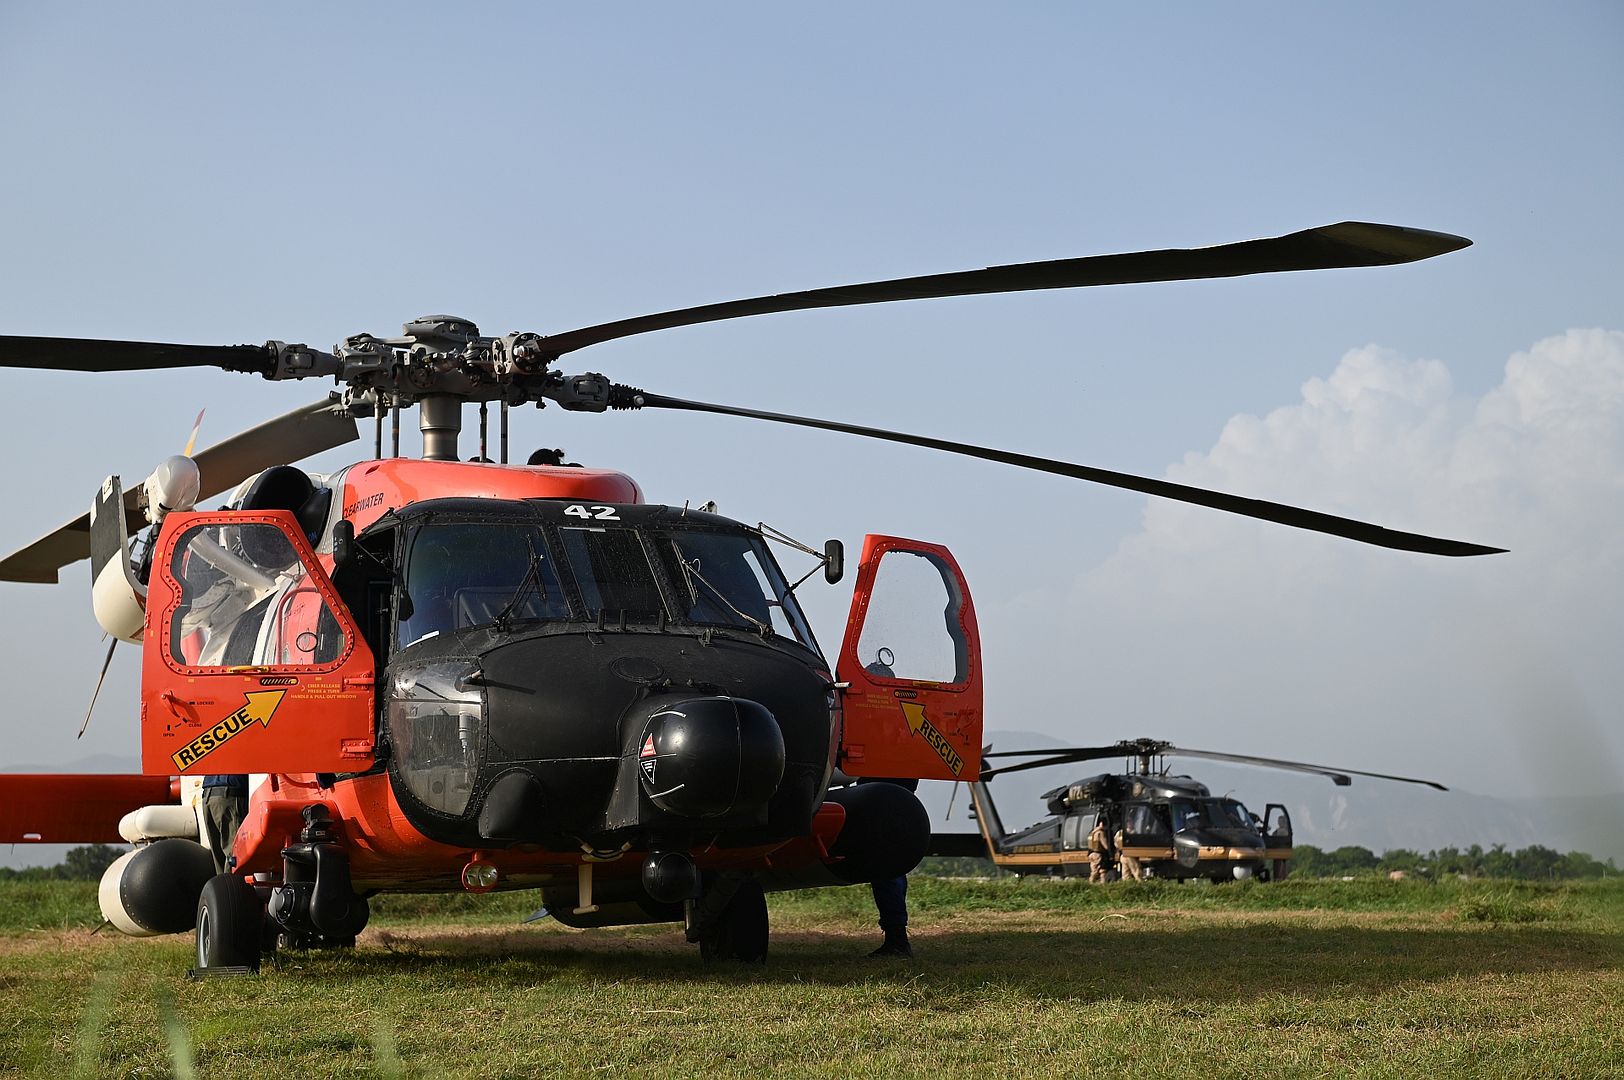 60 Jayhawk Helicopter Aircrew From Coast Guard Air Station Borinquen Puerto Rico And A Customs And Border Patrol Helicopter Aircrew From Aguadilla Puerto Rico